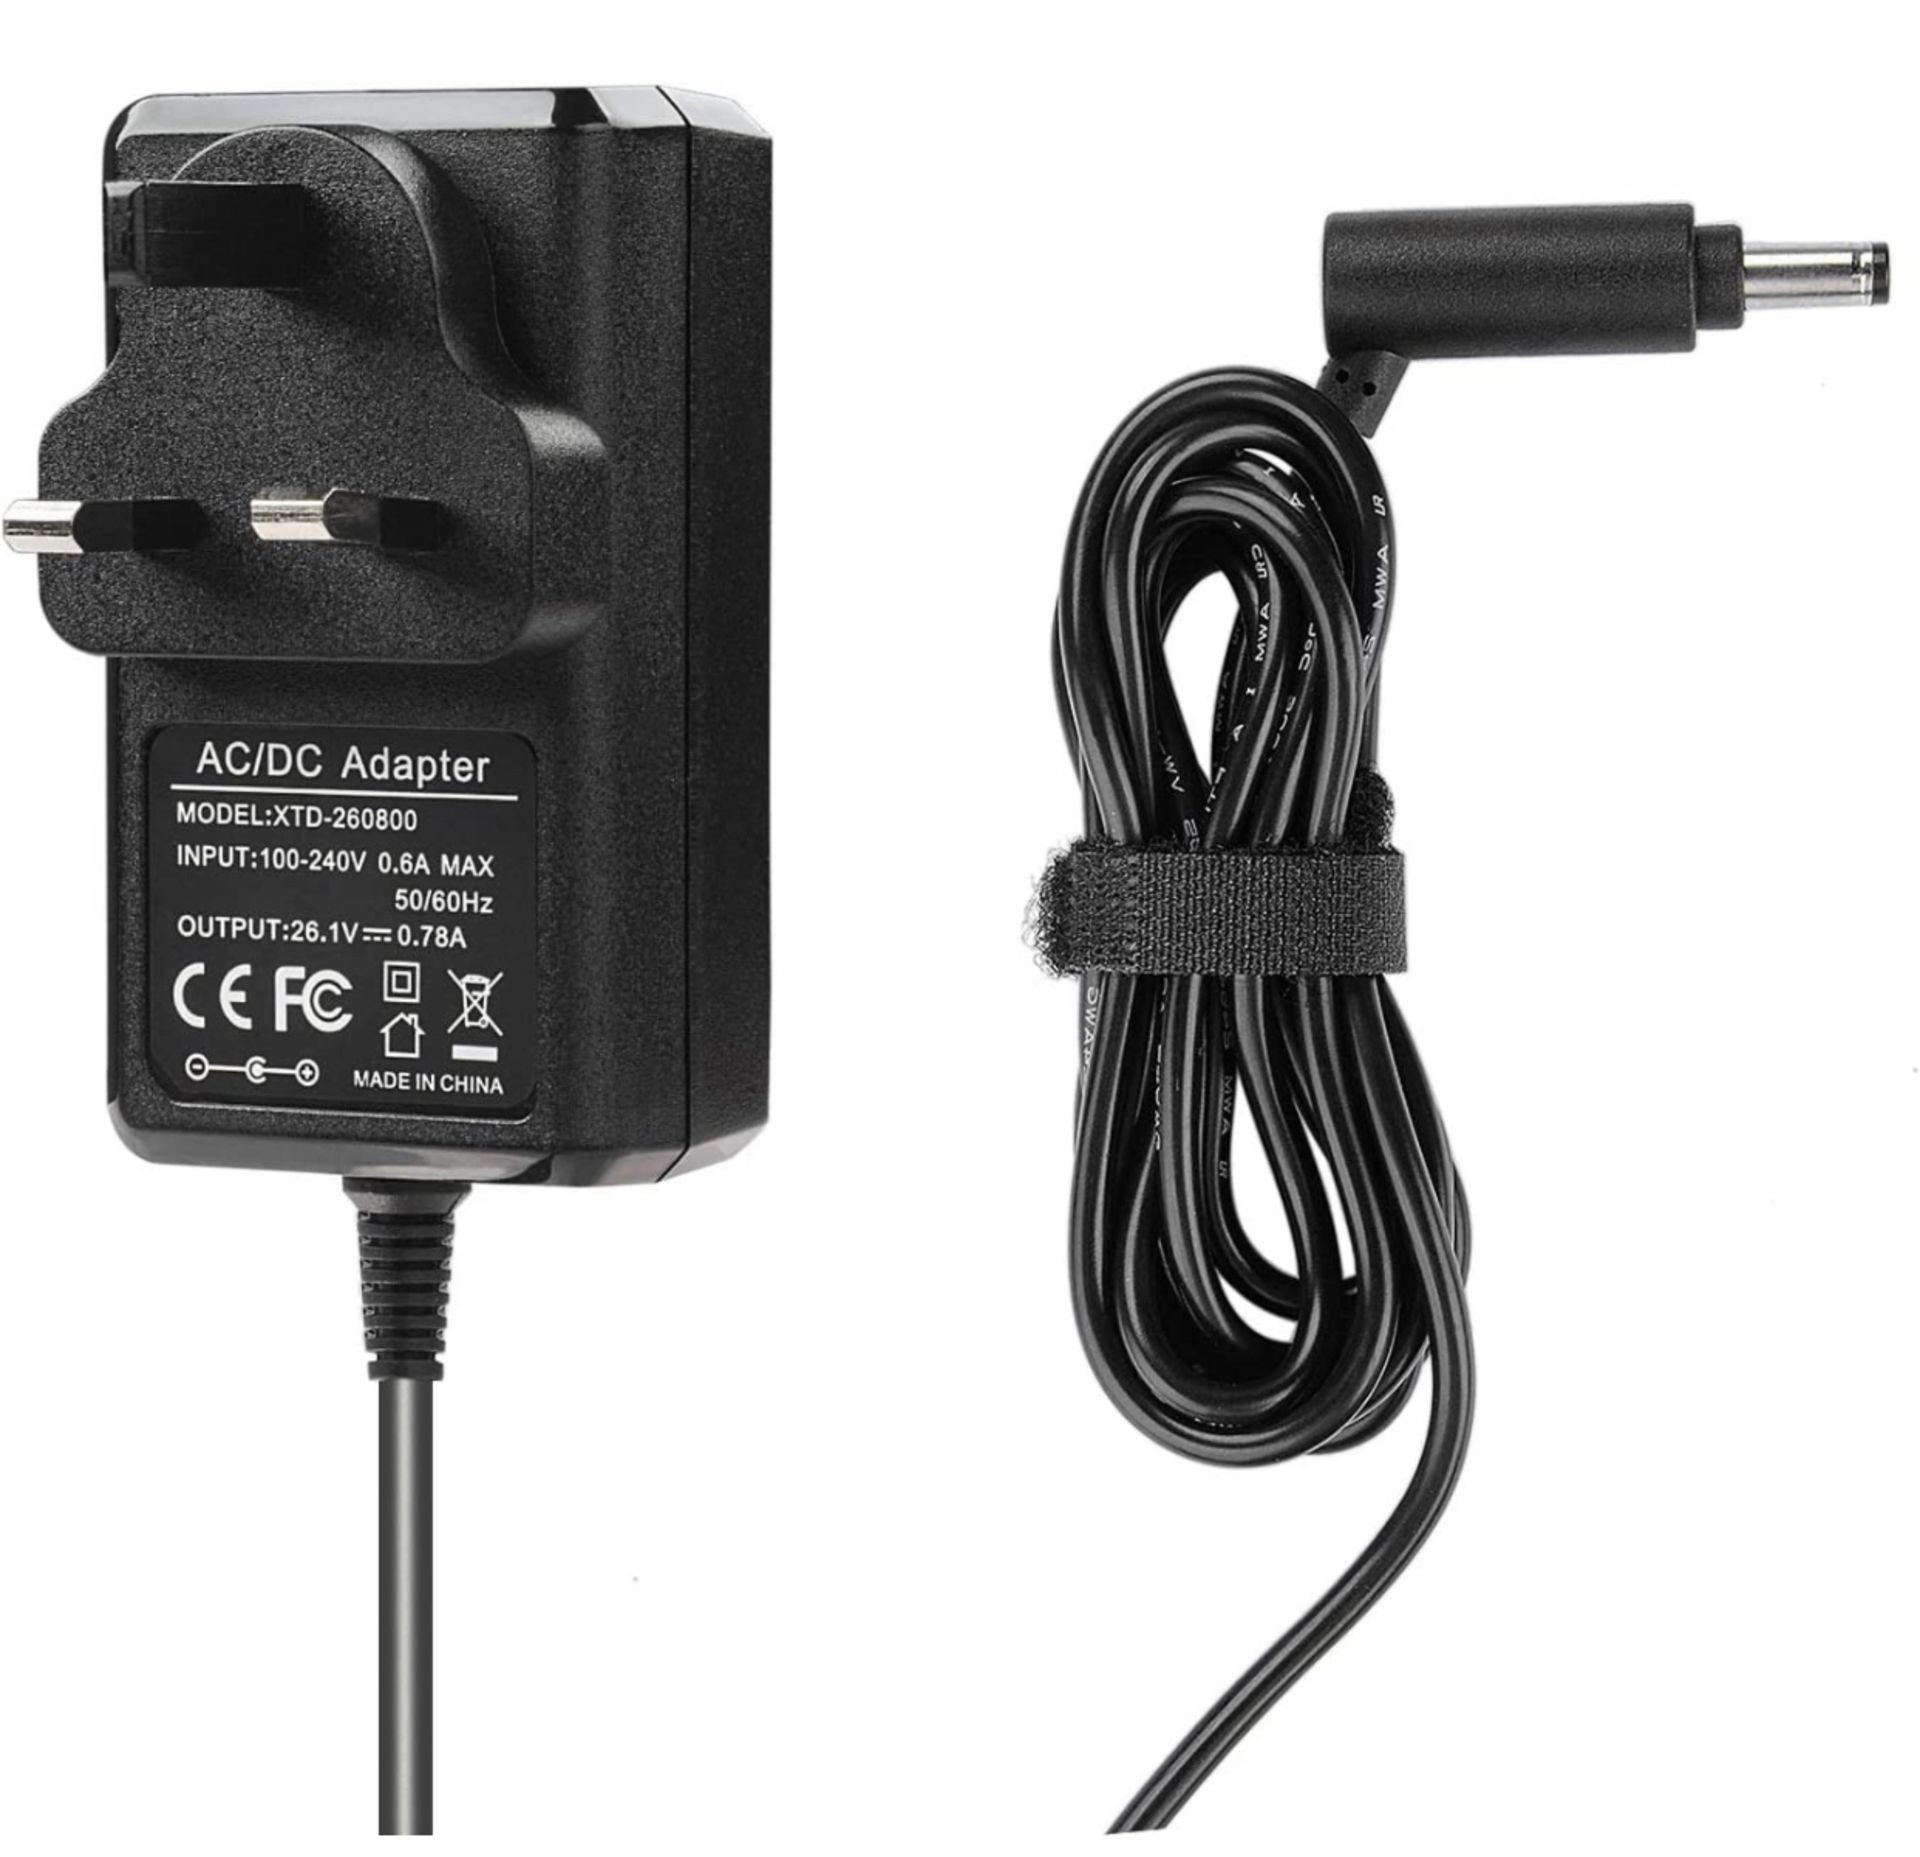 Hasess Replacement Chargers for Dyson (for model/ description, see image)